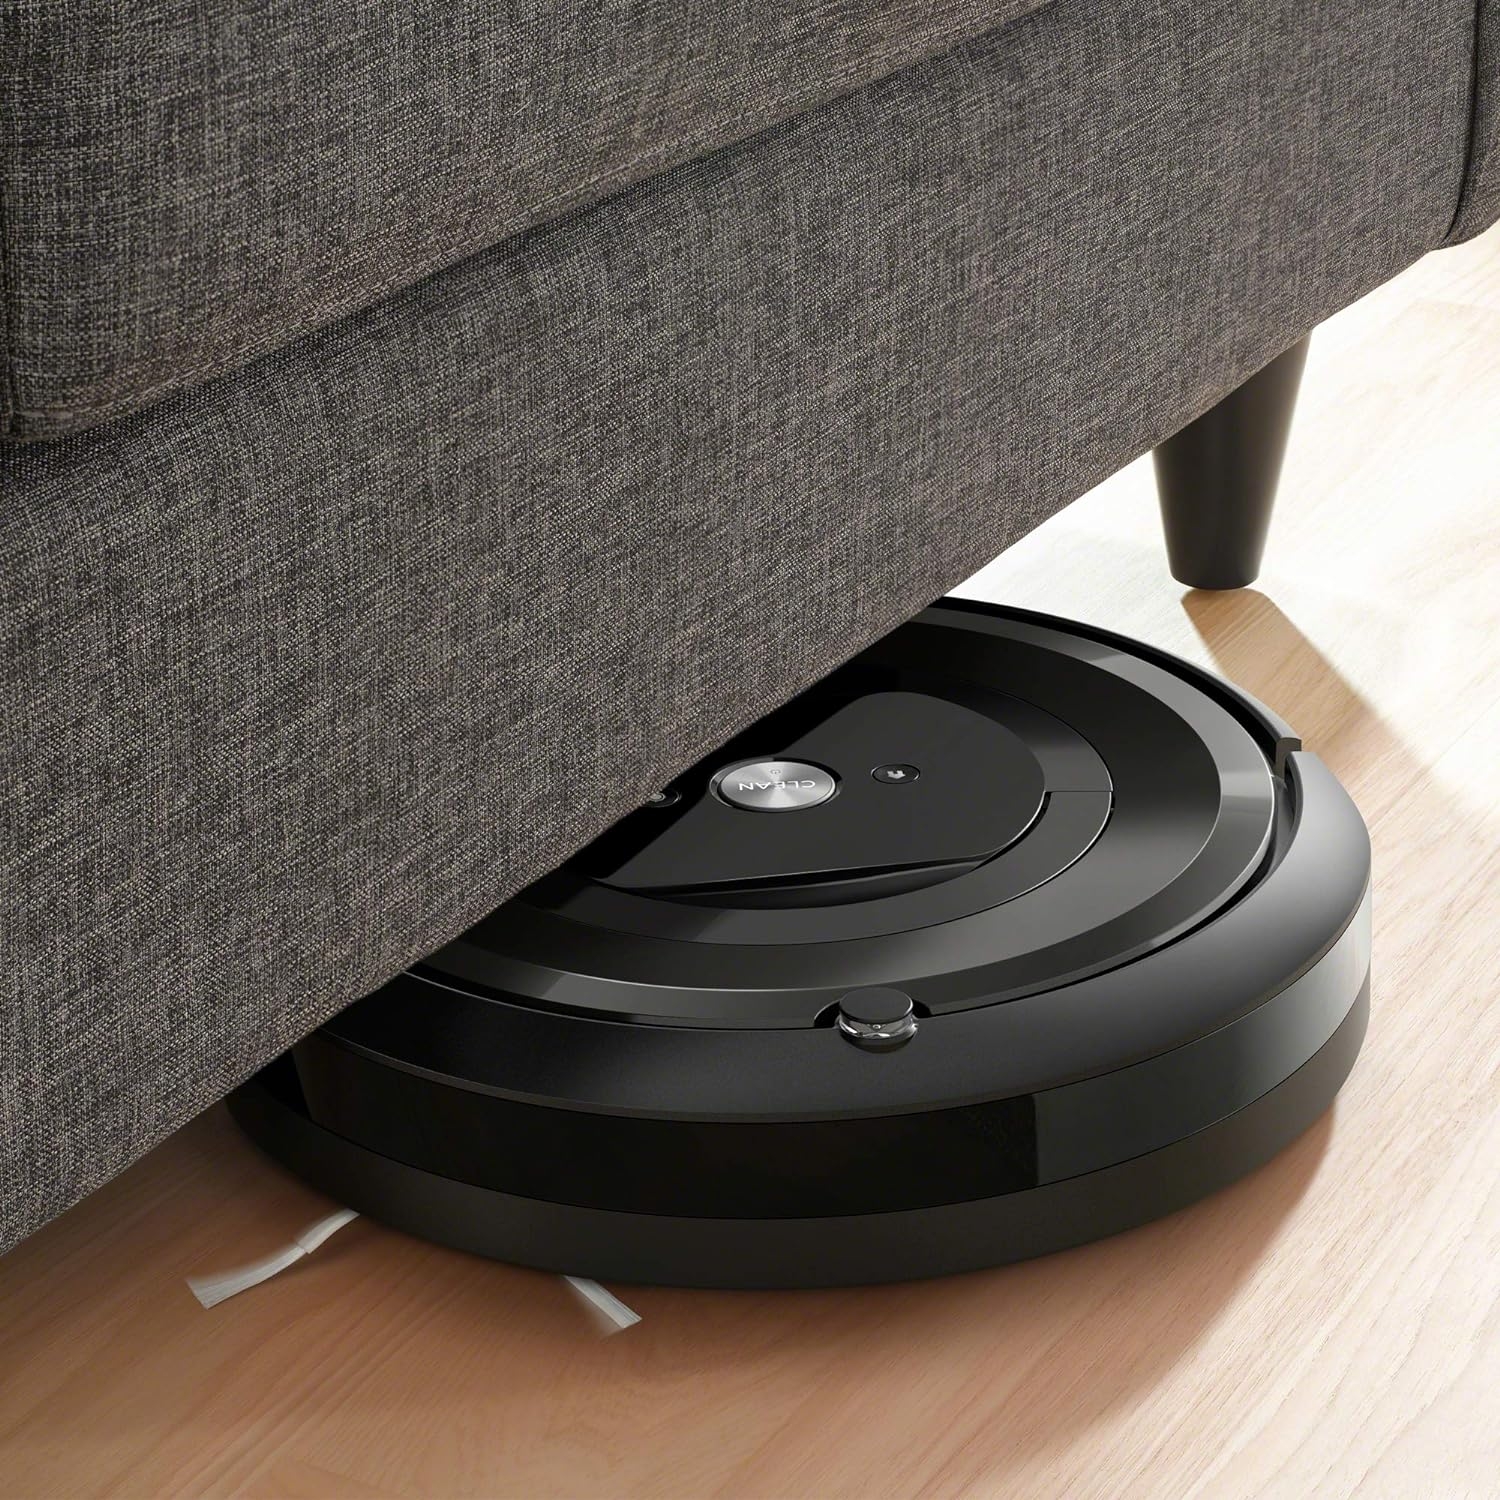 iRobot Roomba E5 (5150) Robot Vacuum - Wi-Fi Connected, Works with Alexa, Ideal for Pet Hair, Carpets, Hard, Self-Charging Robotic Vacuum